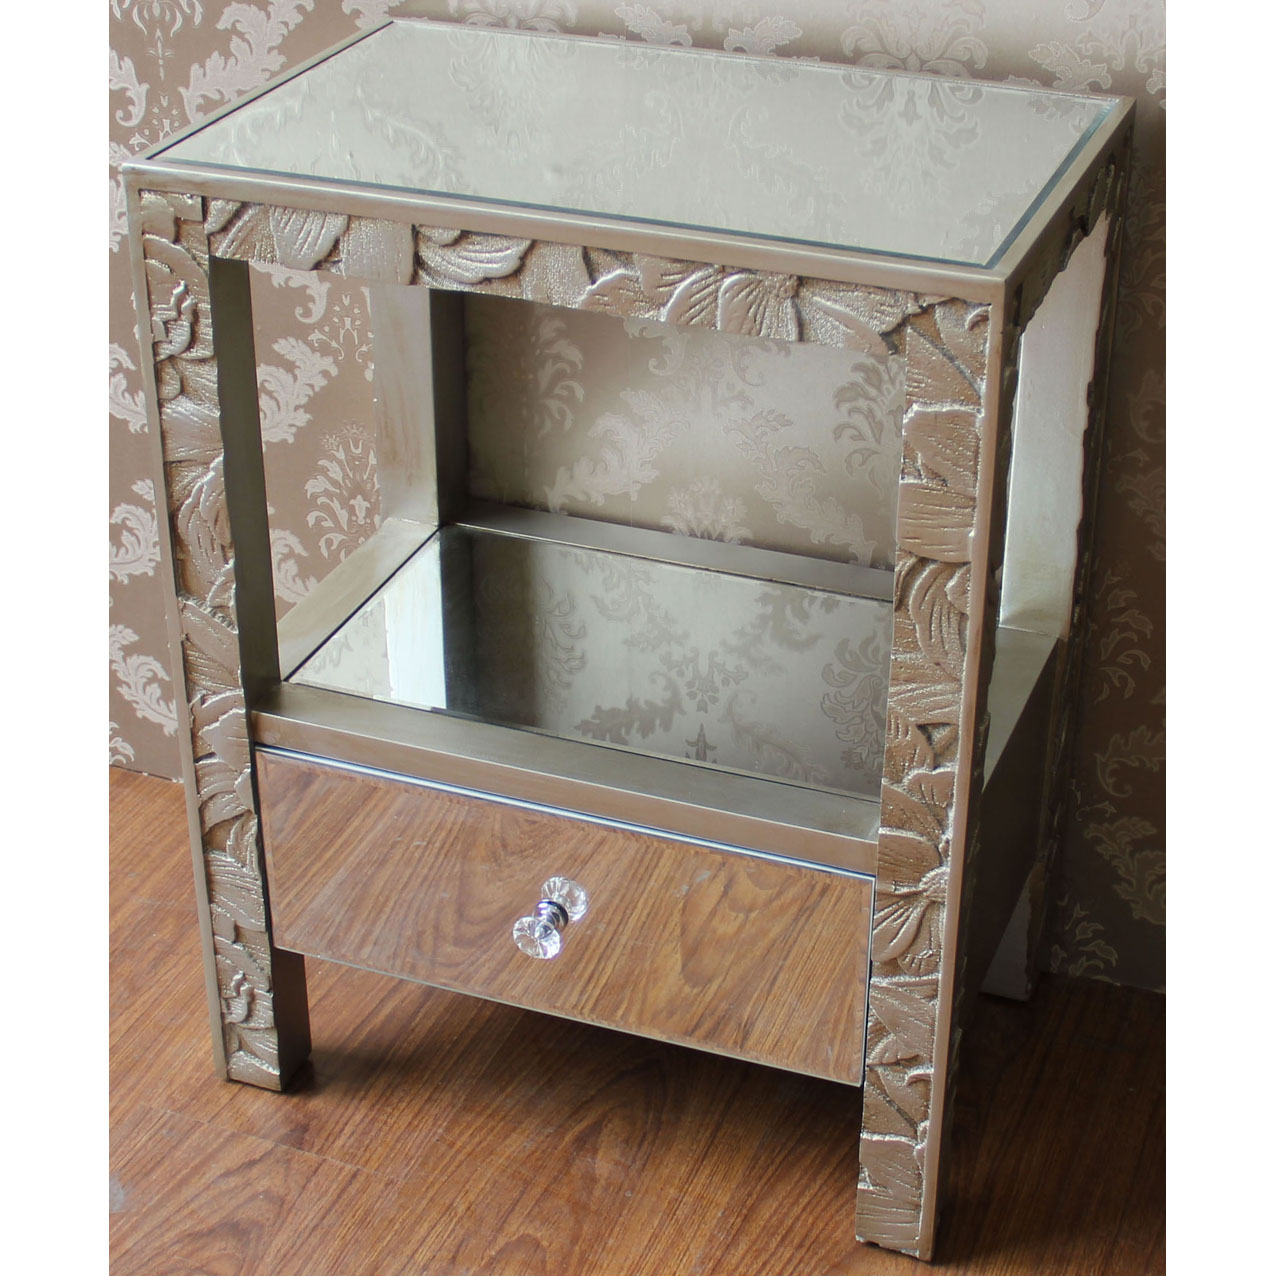 Champagne color wood night stand with 1 mirror drawer & 1 layer and top